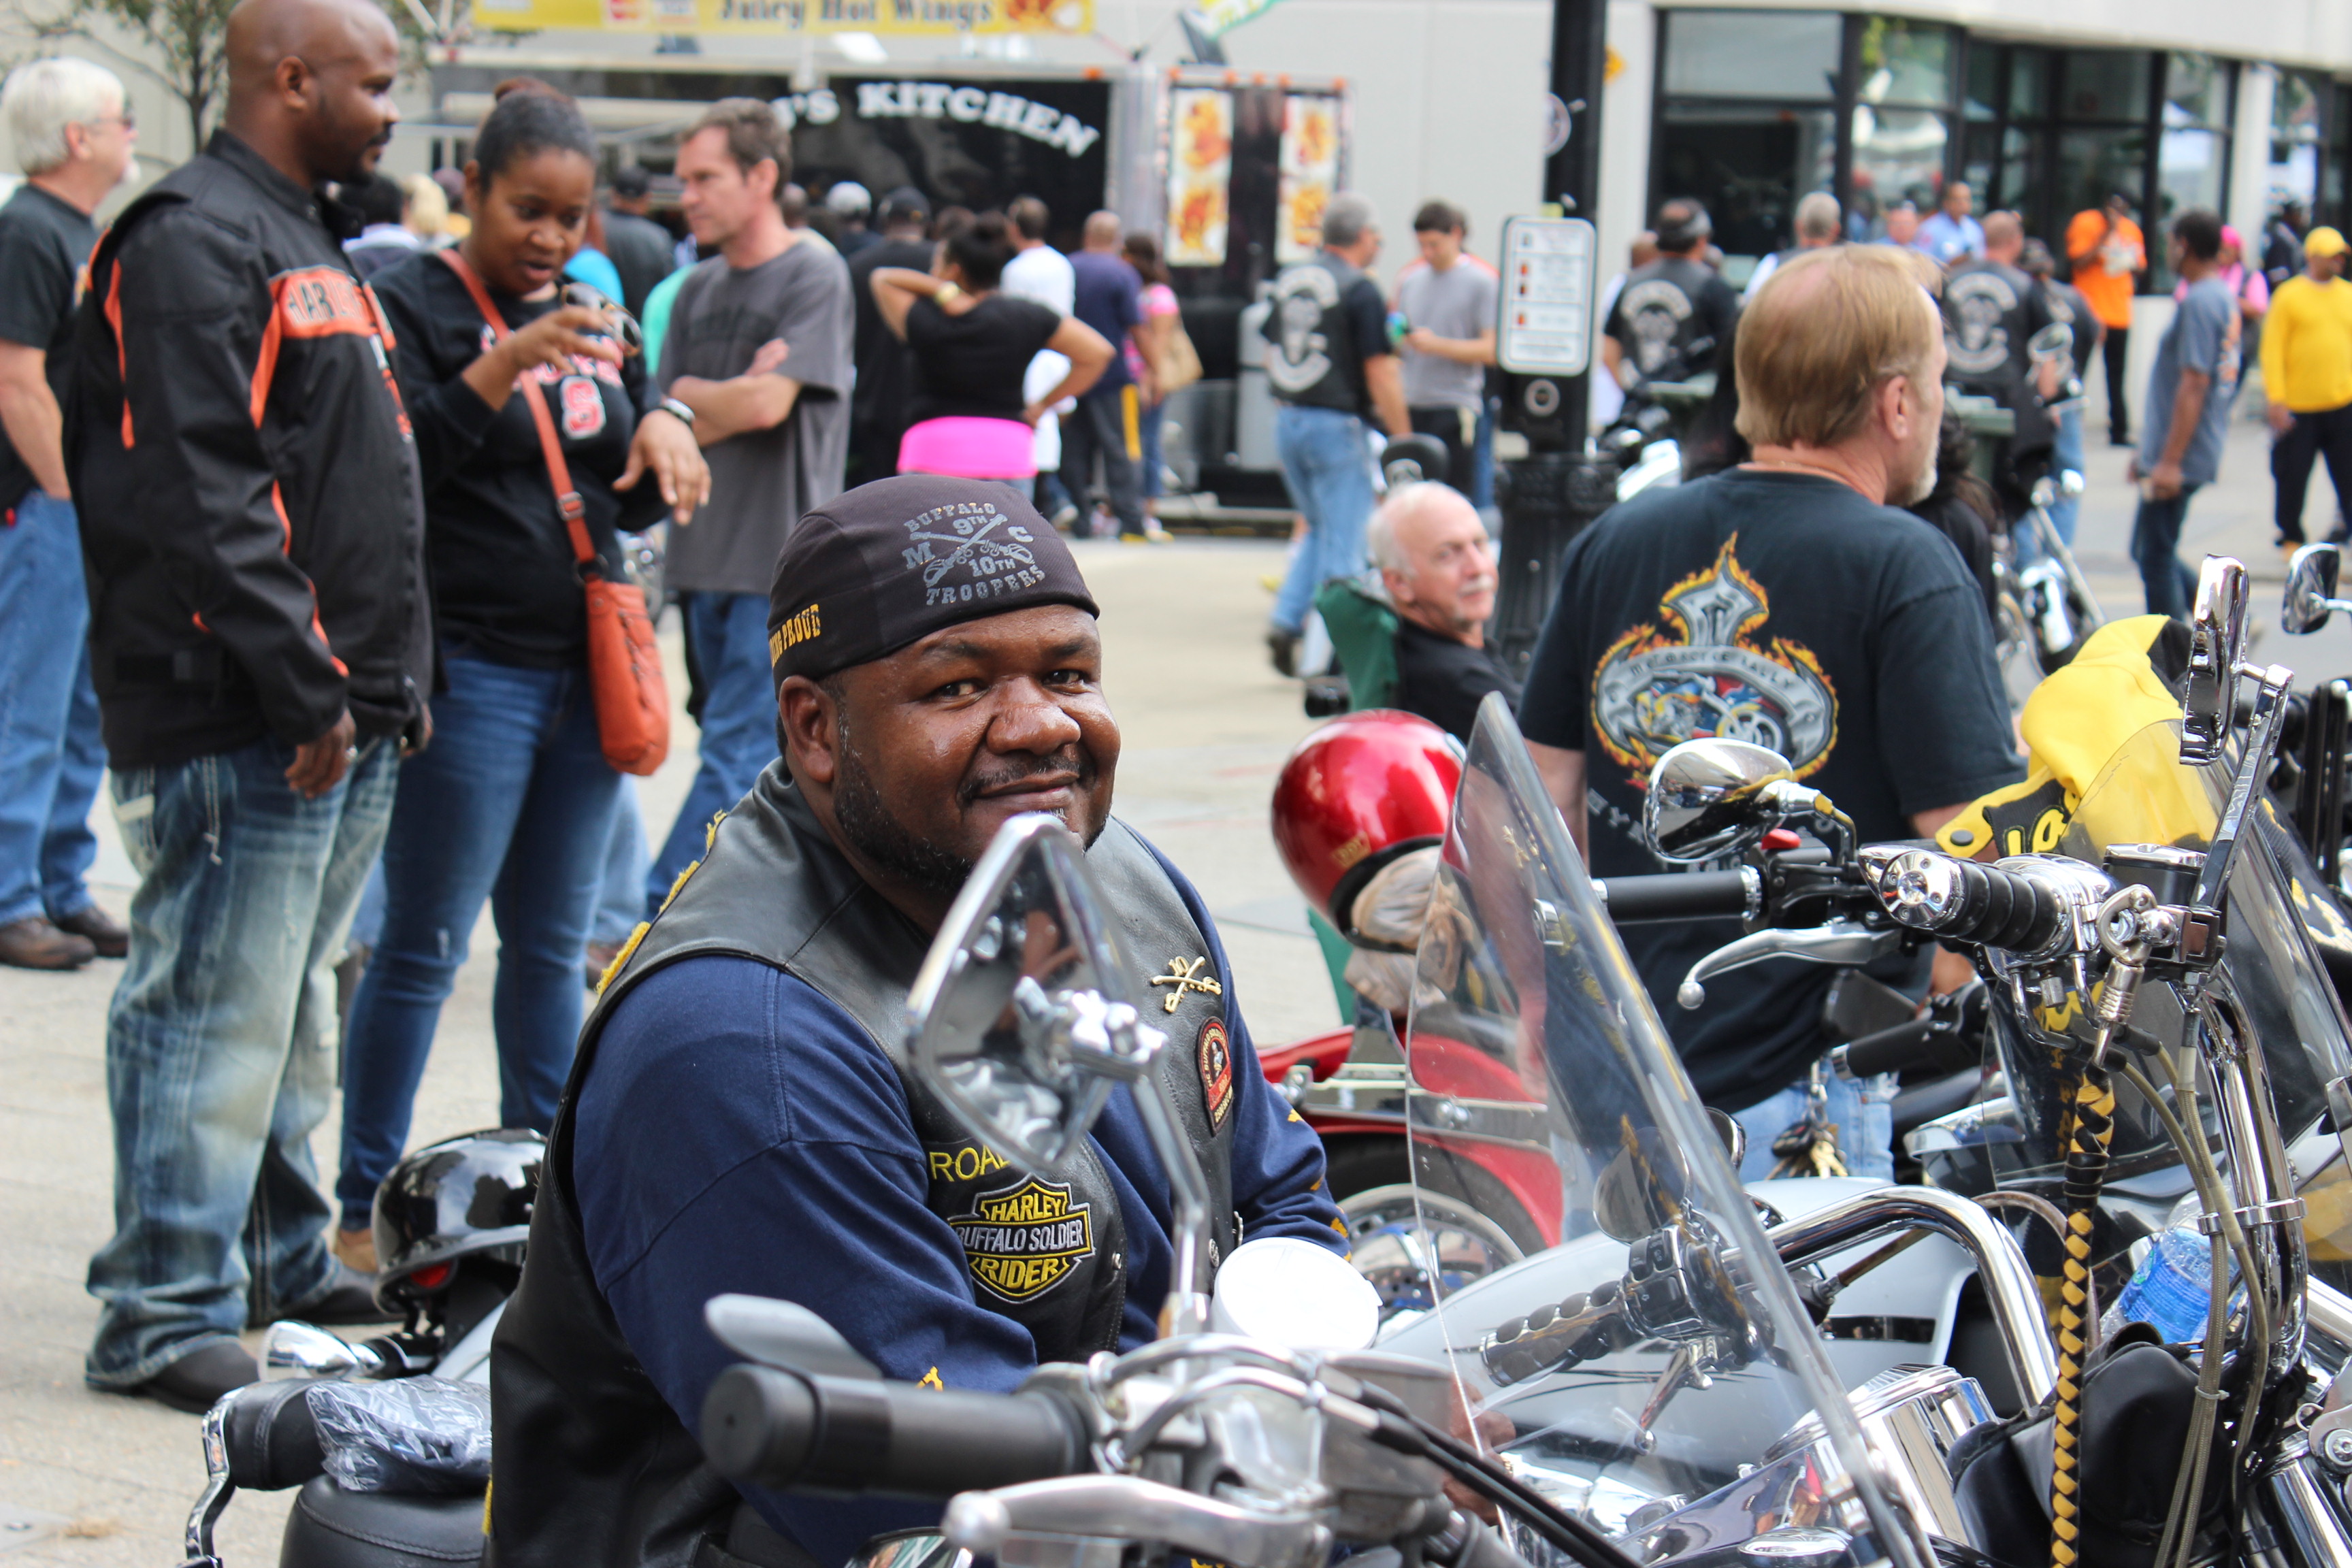 Ray Price Capital City Bikefest returns to downtown Raleigh, Sept. 23-25, 2016, presented by GEICO Motorcycle.